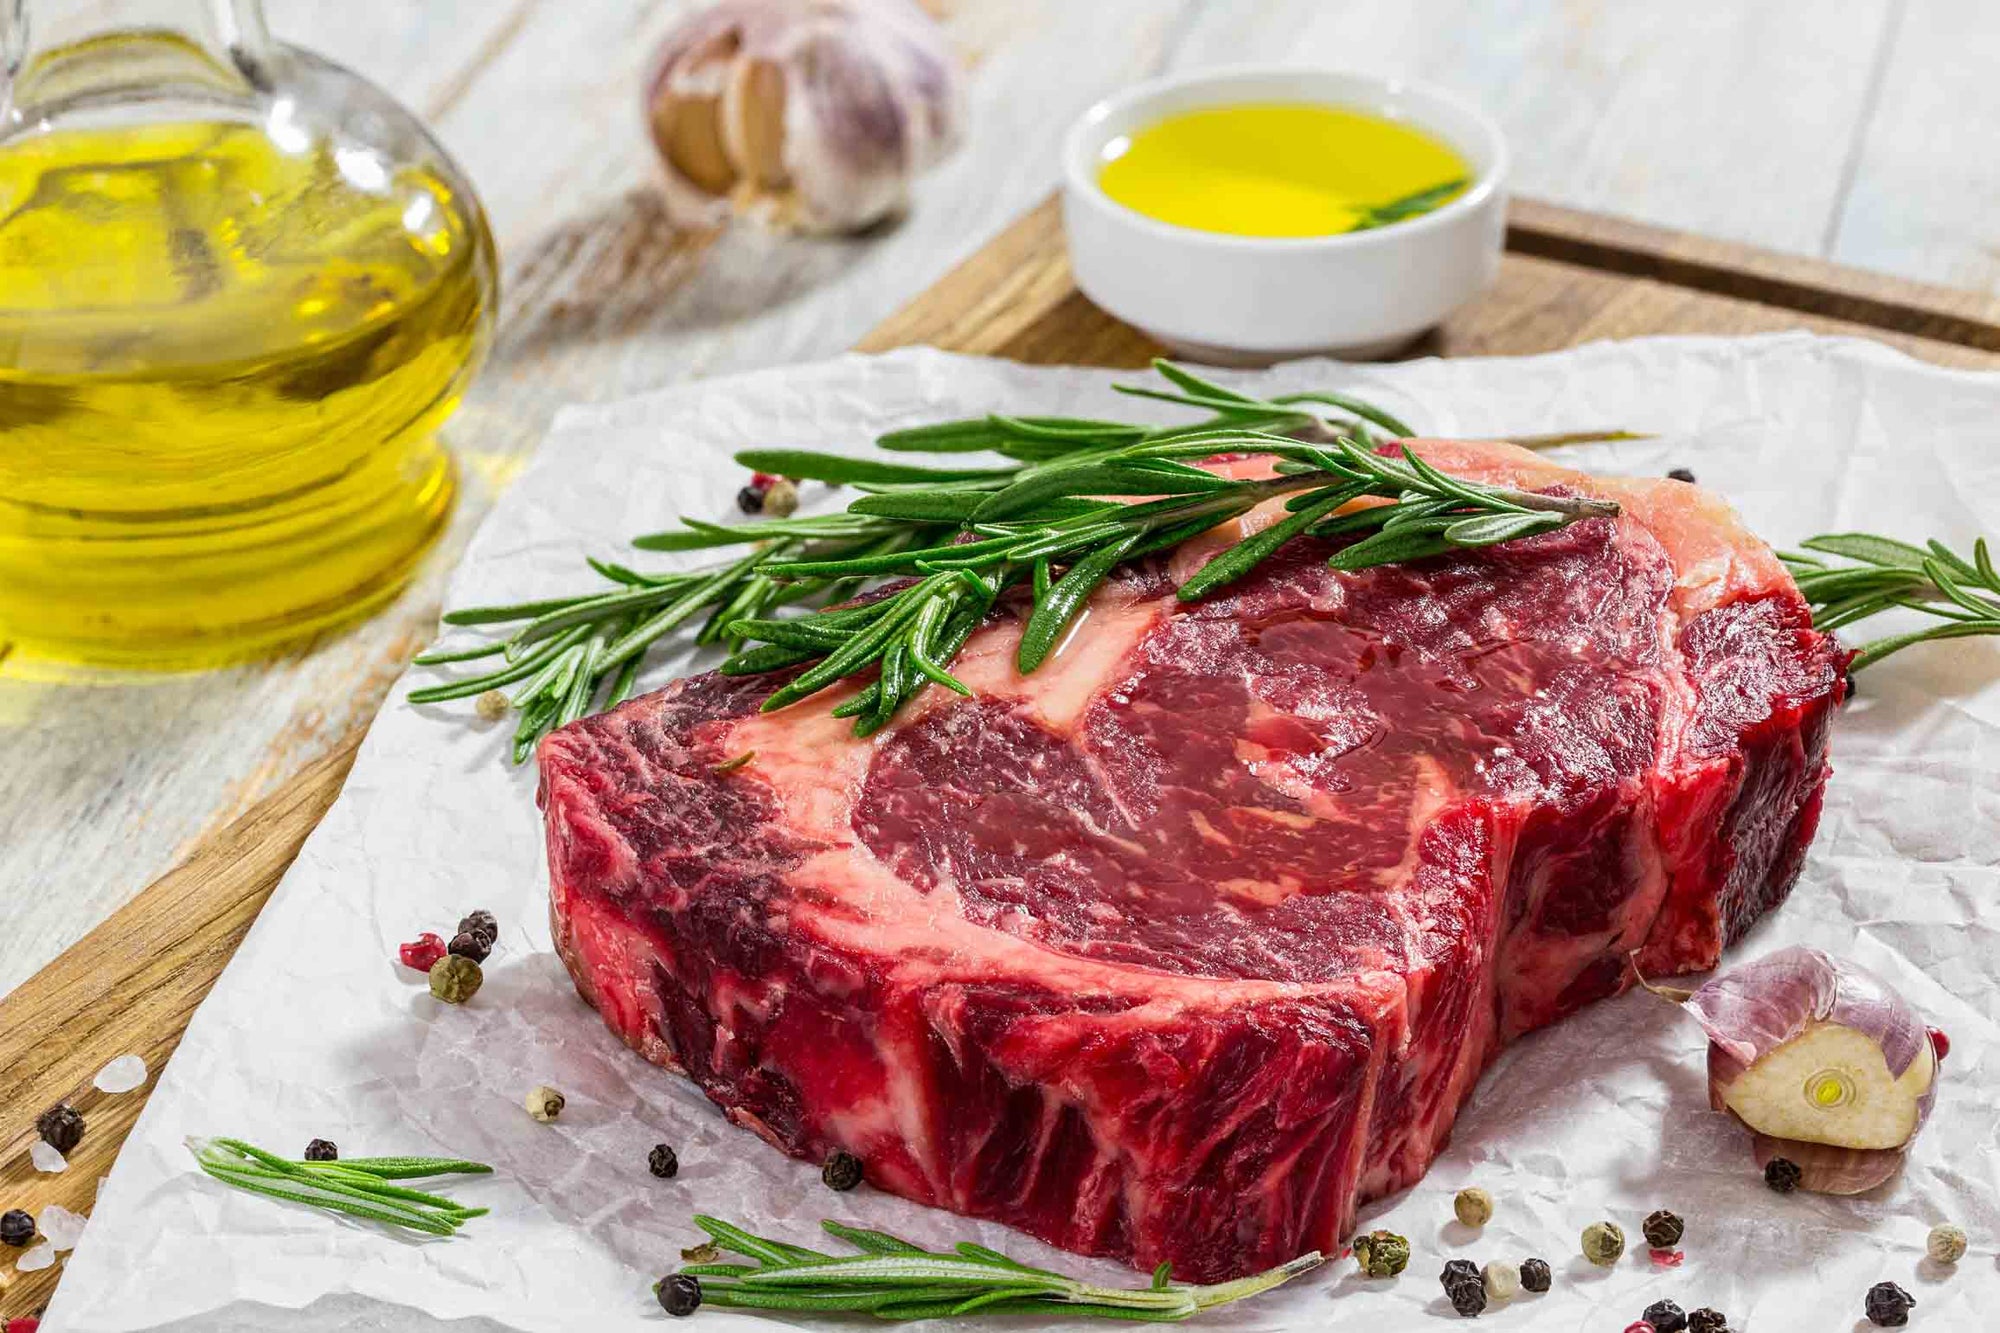 regenerative 100% grass fed beef steaks aged prime good fat tender Northstar Bison non-GMO humane harvest celiac Crone's gut health grill bbq cattle cow steer marbling ribeye filet mignon new york strip top sirloin chef approved sear cast iron skill pan